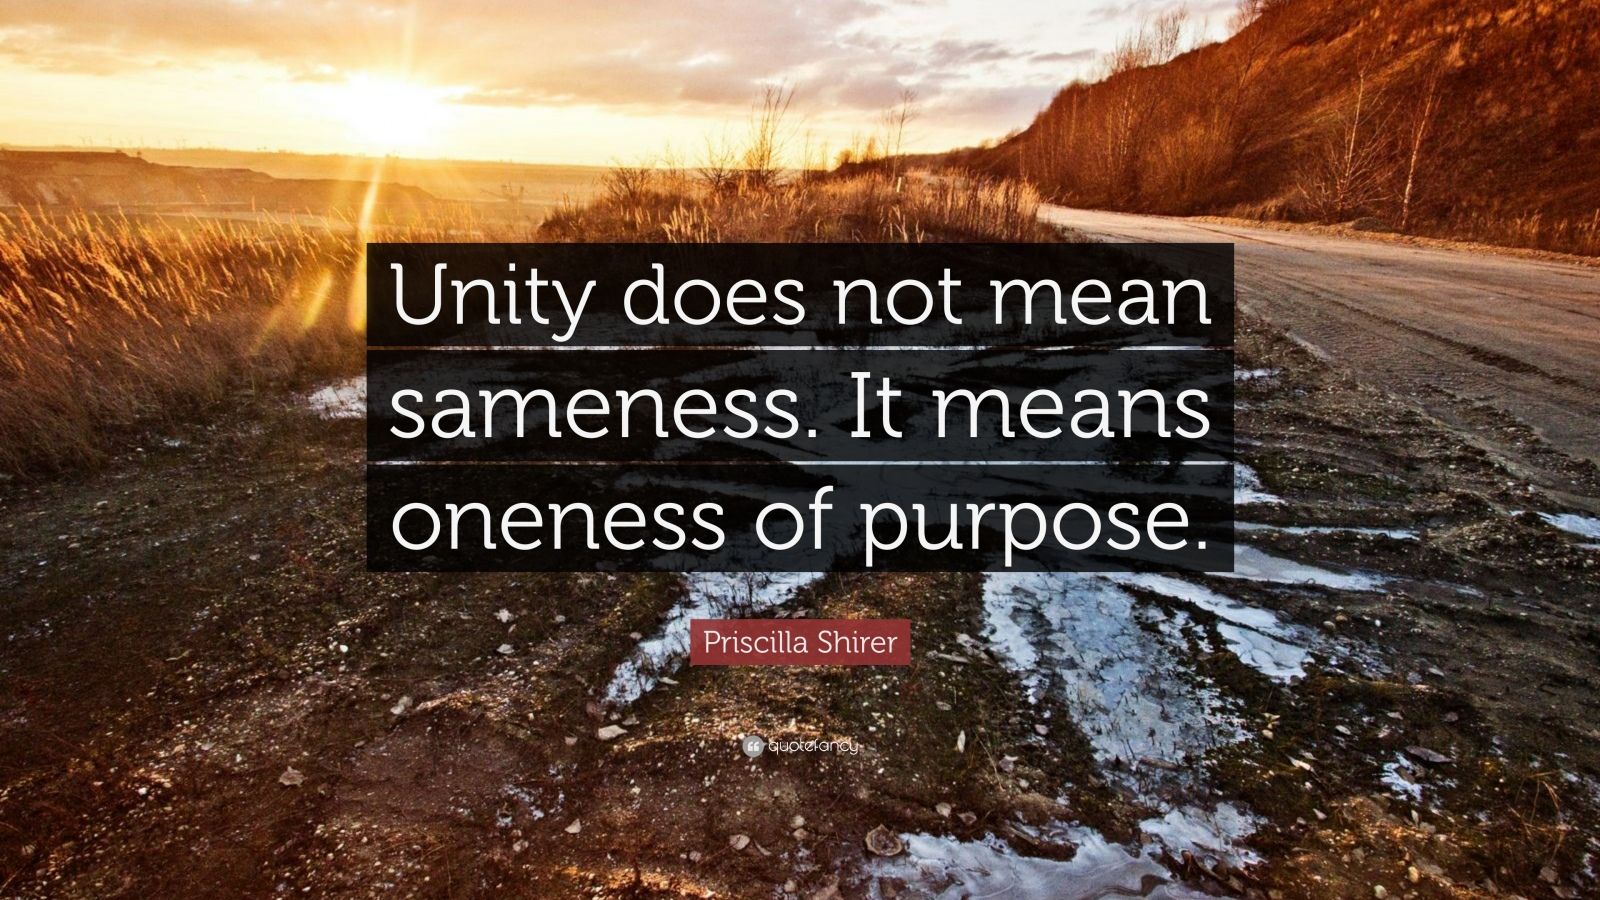 Priscilla Shirer Quote “Unity does not mean sameness. It